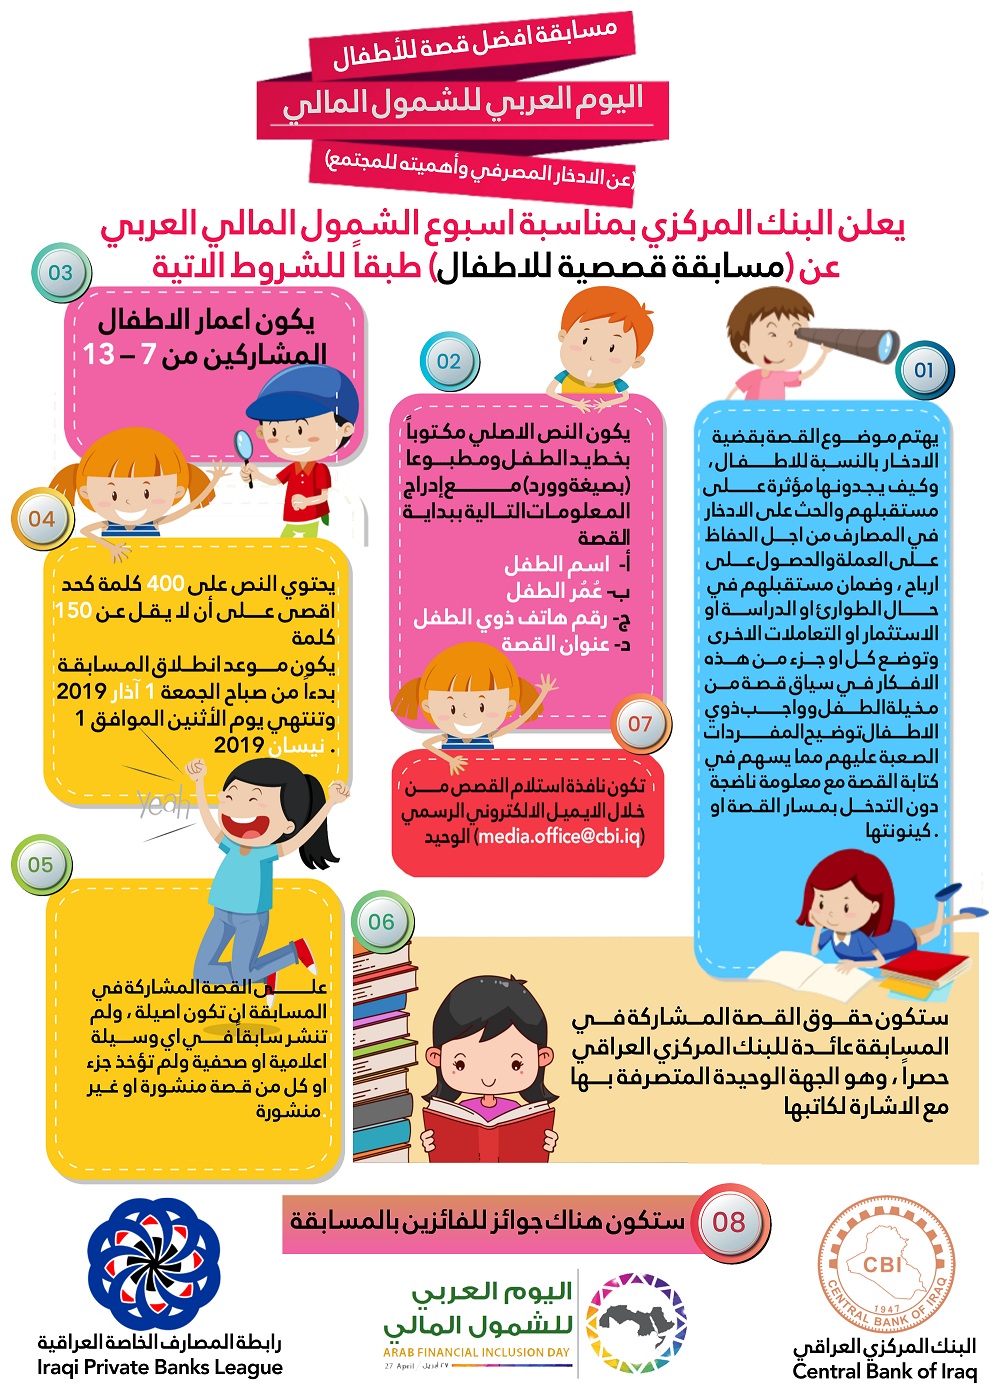 Competition best story for children about bank savings and its importance to society